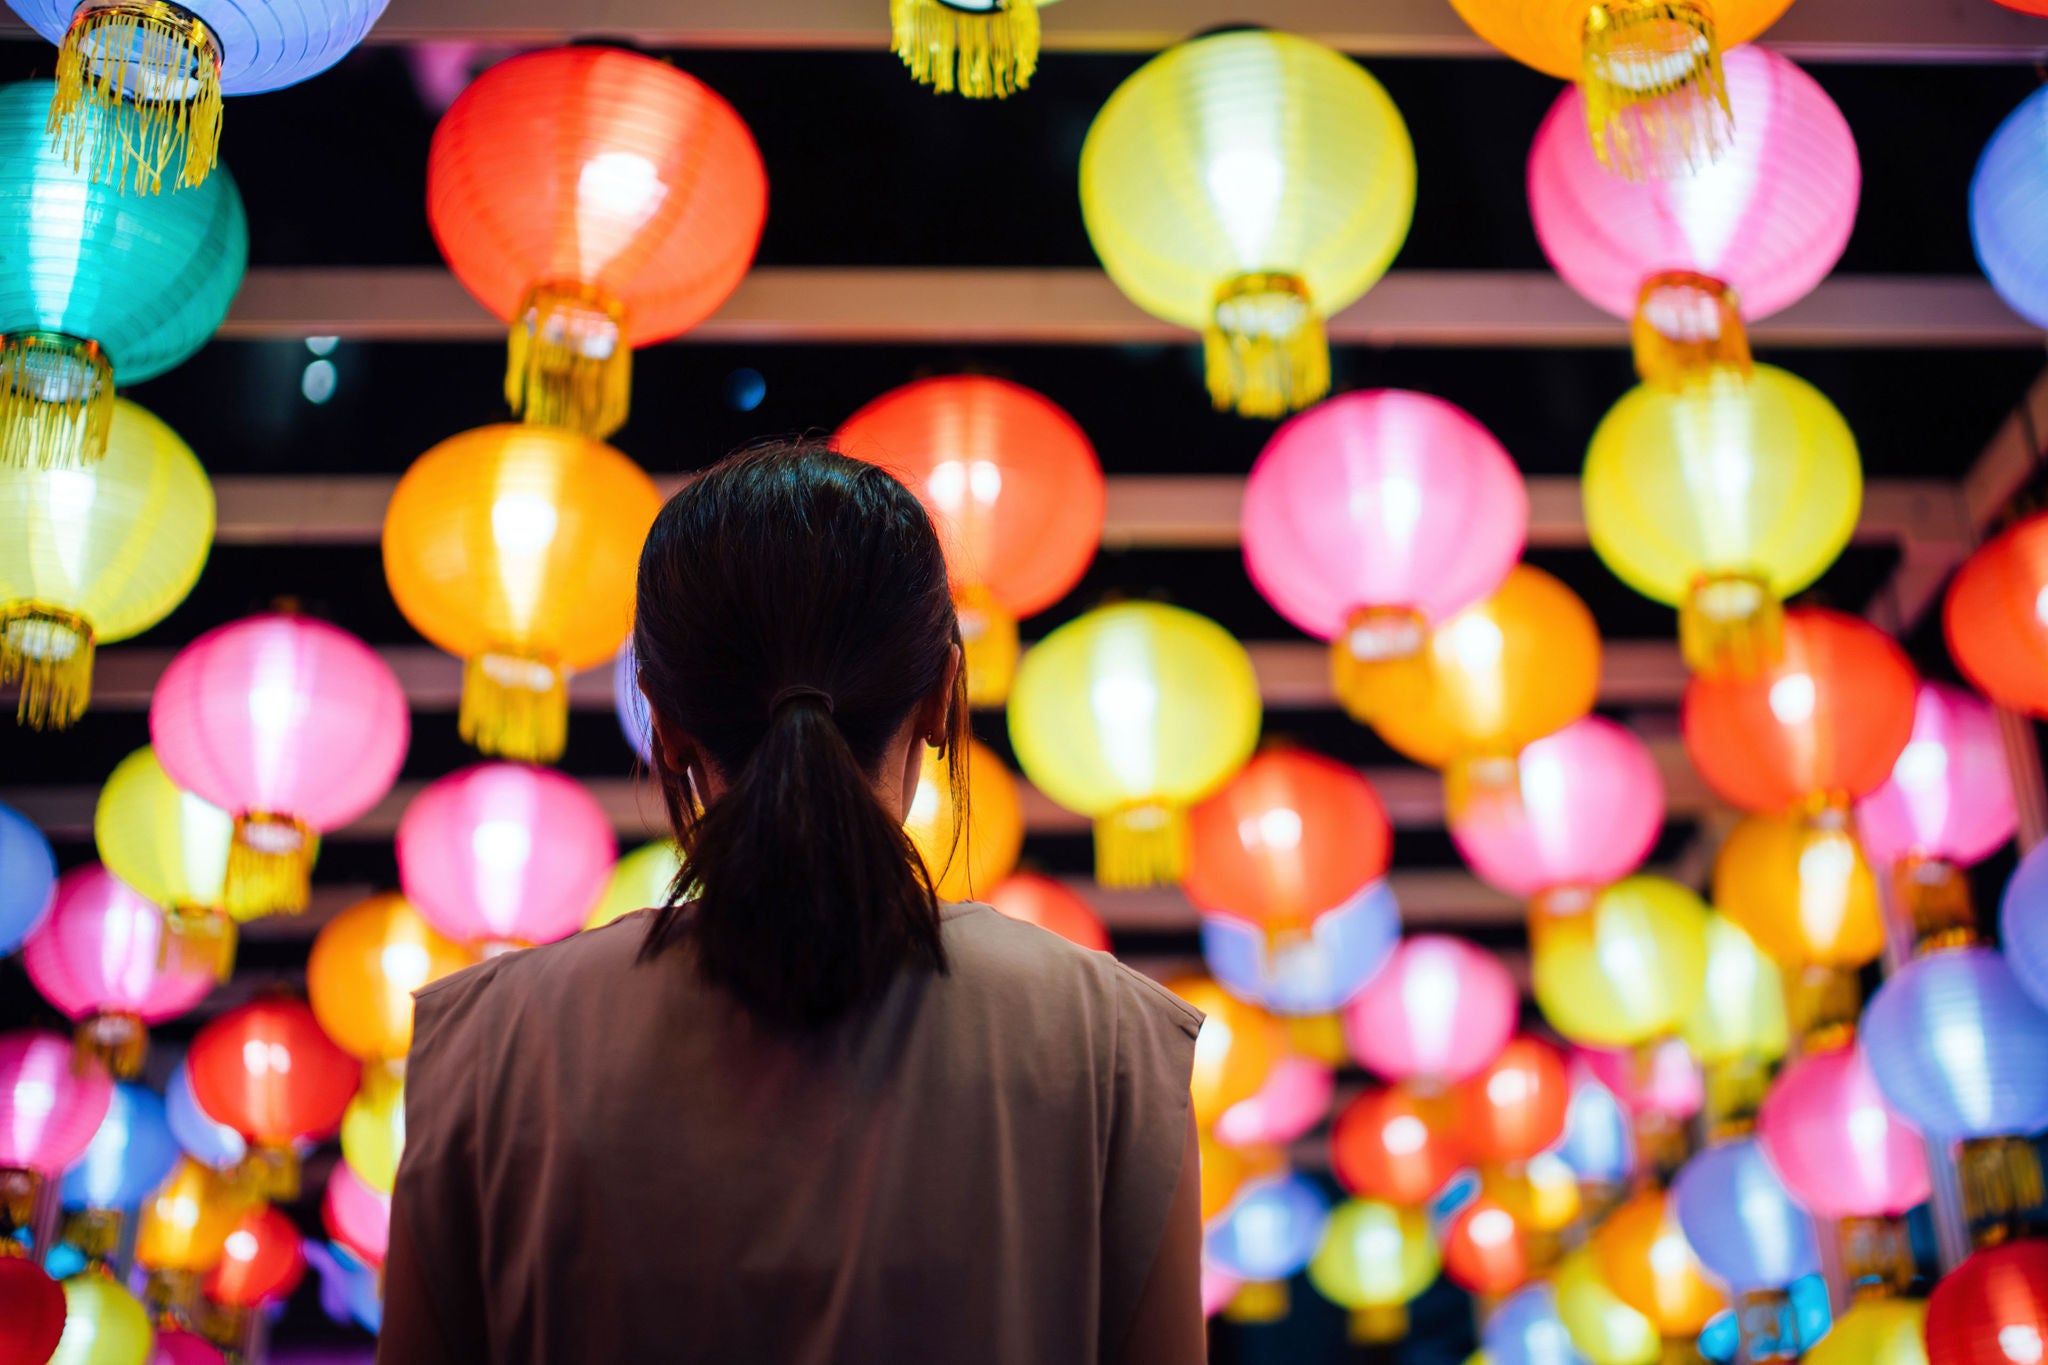 Rear view of young Asian woman looking up and admiring the hanging illuminated and colourful traditional Chinese lanterns on city street at night. Traditional Chinese culture, festival and celebration event theme